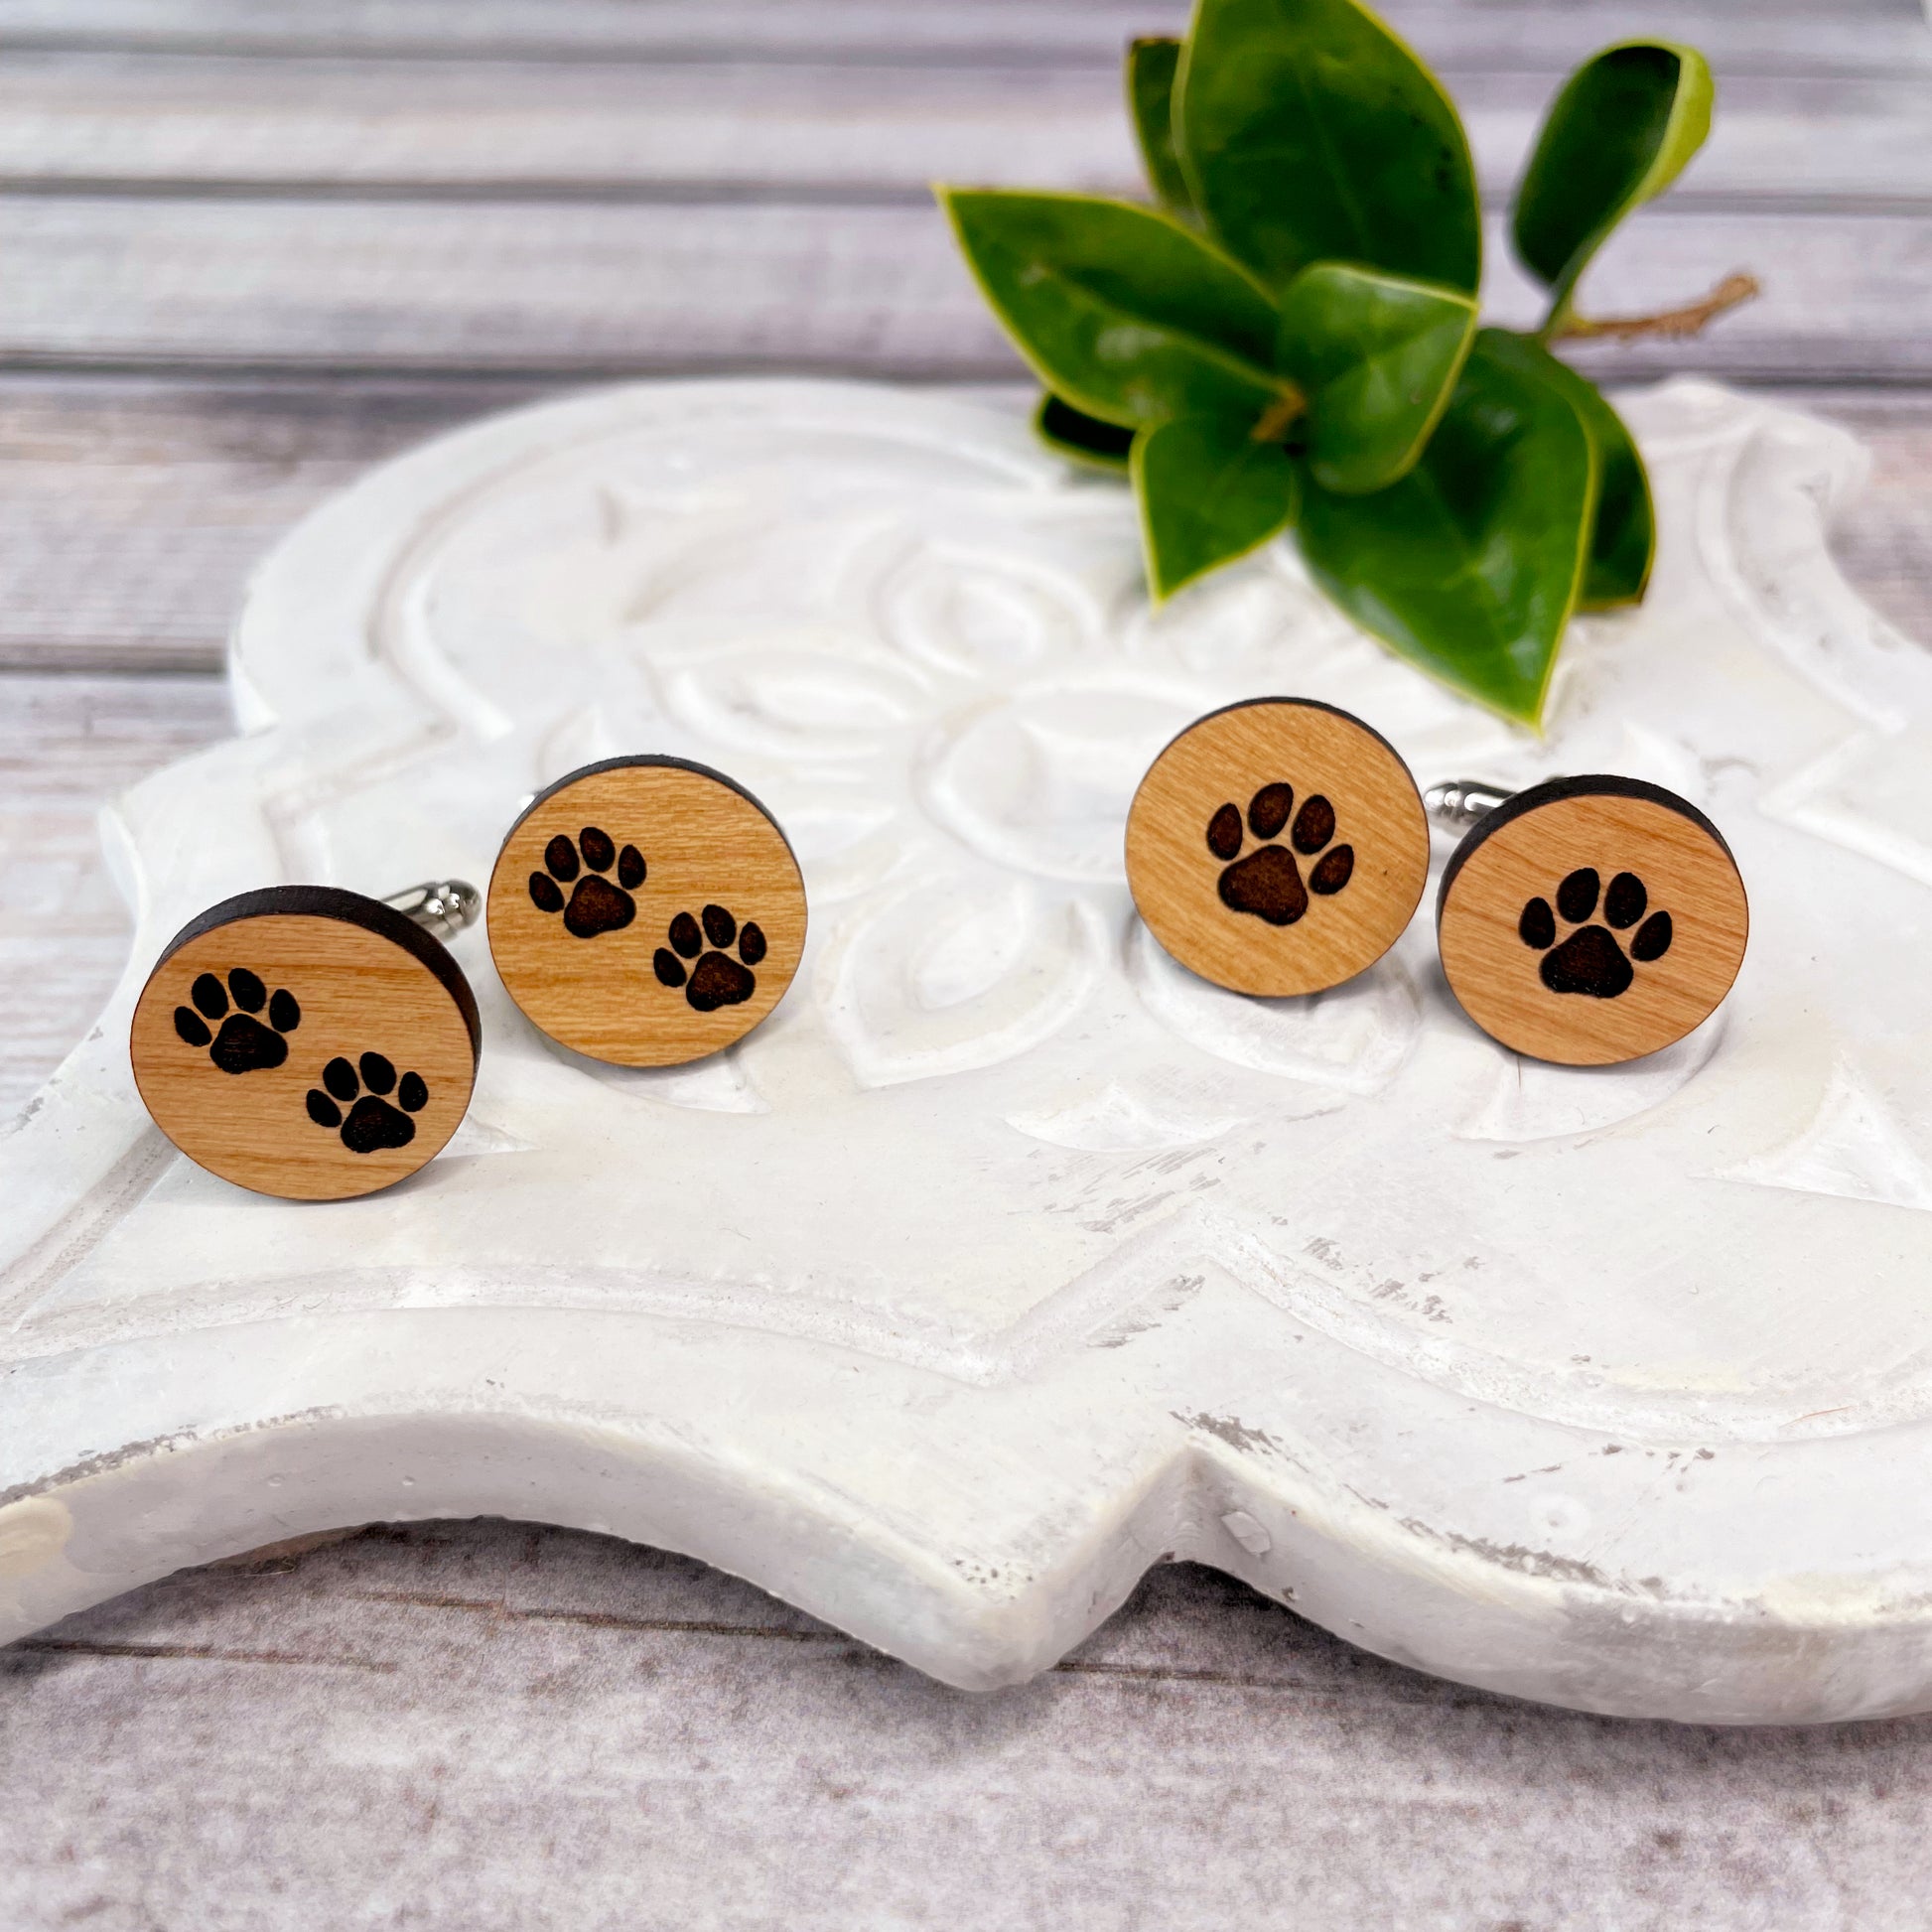 Engraved wooden cufflinks with a paw print